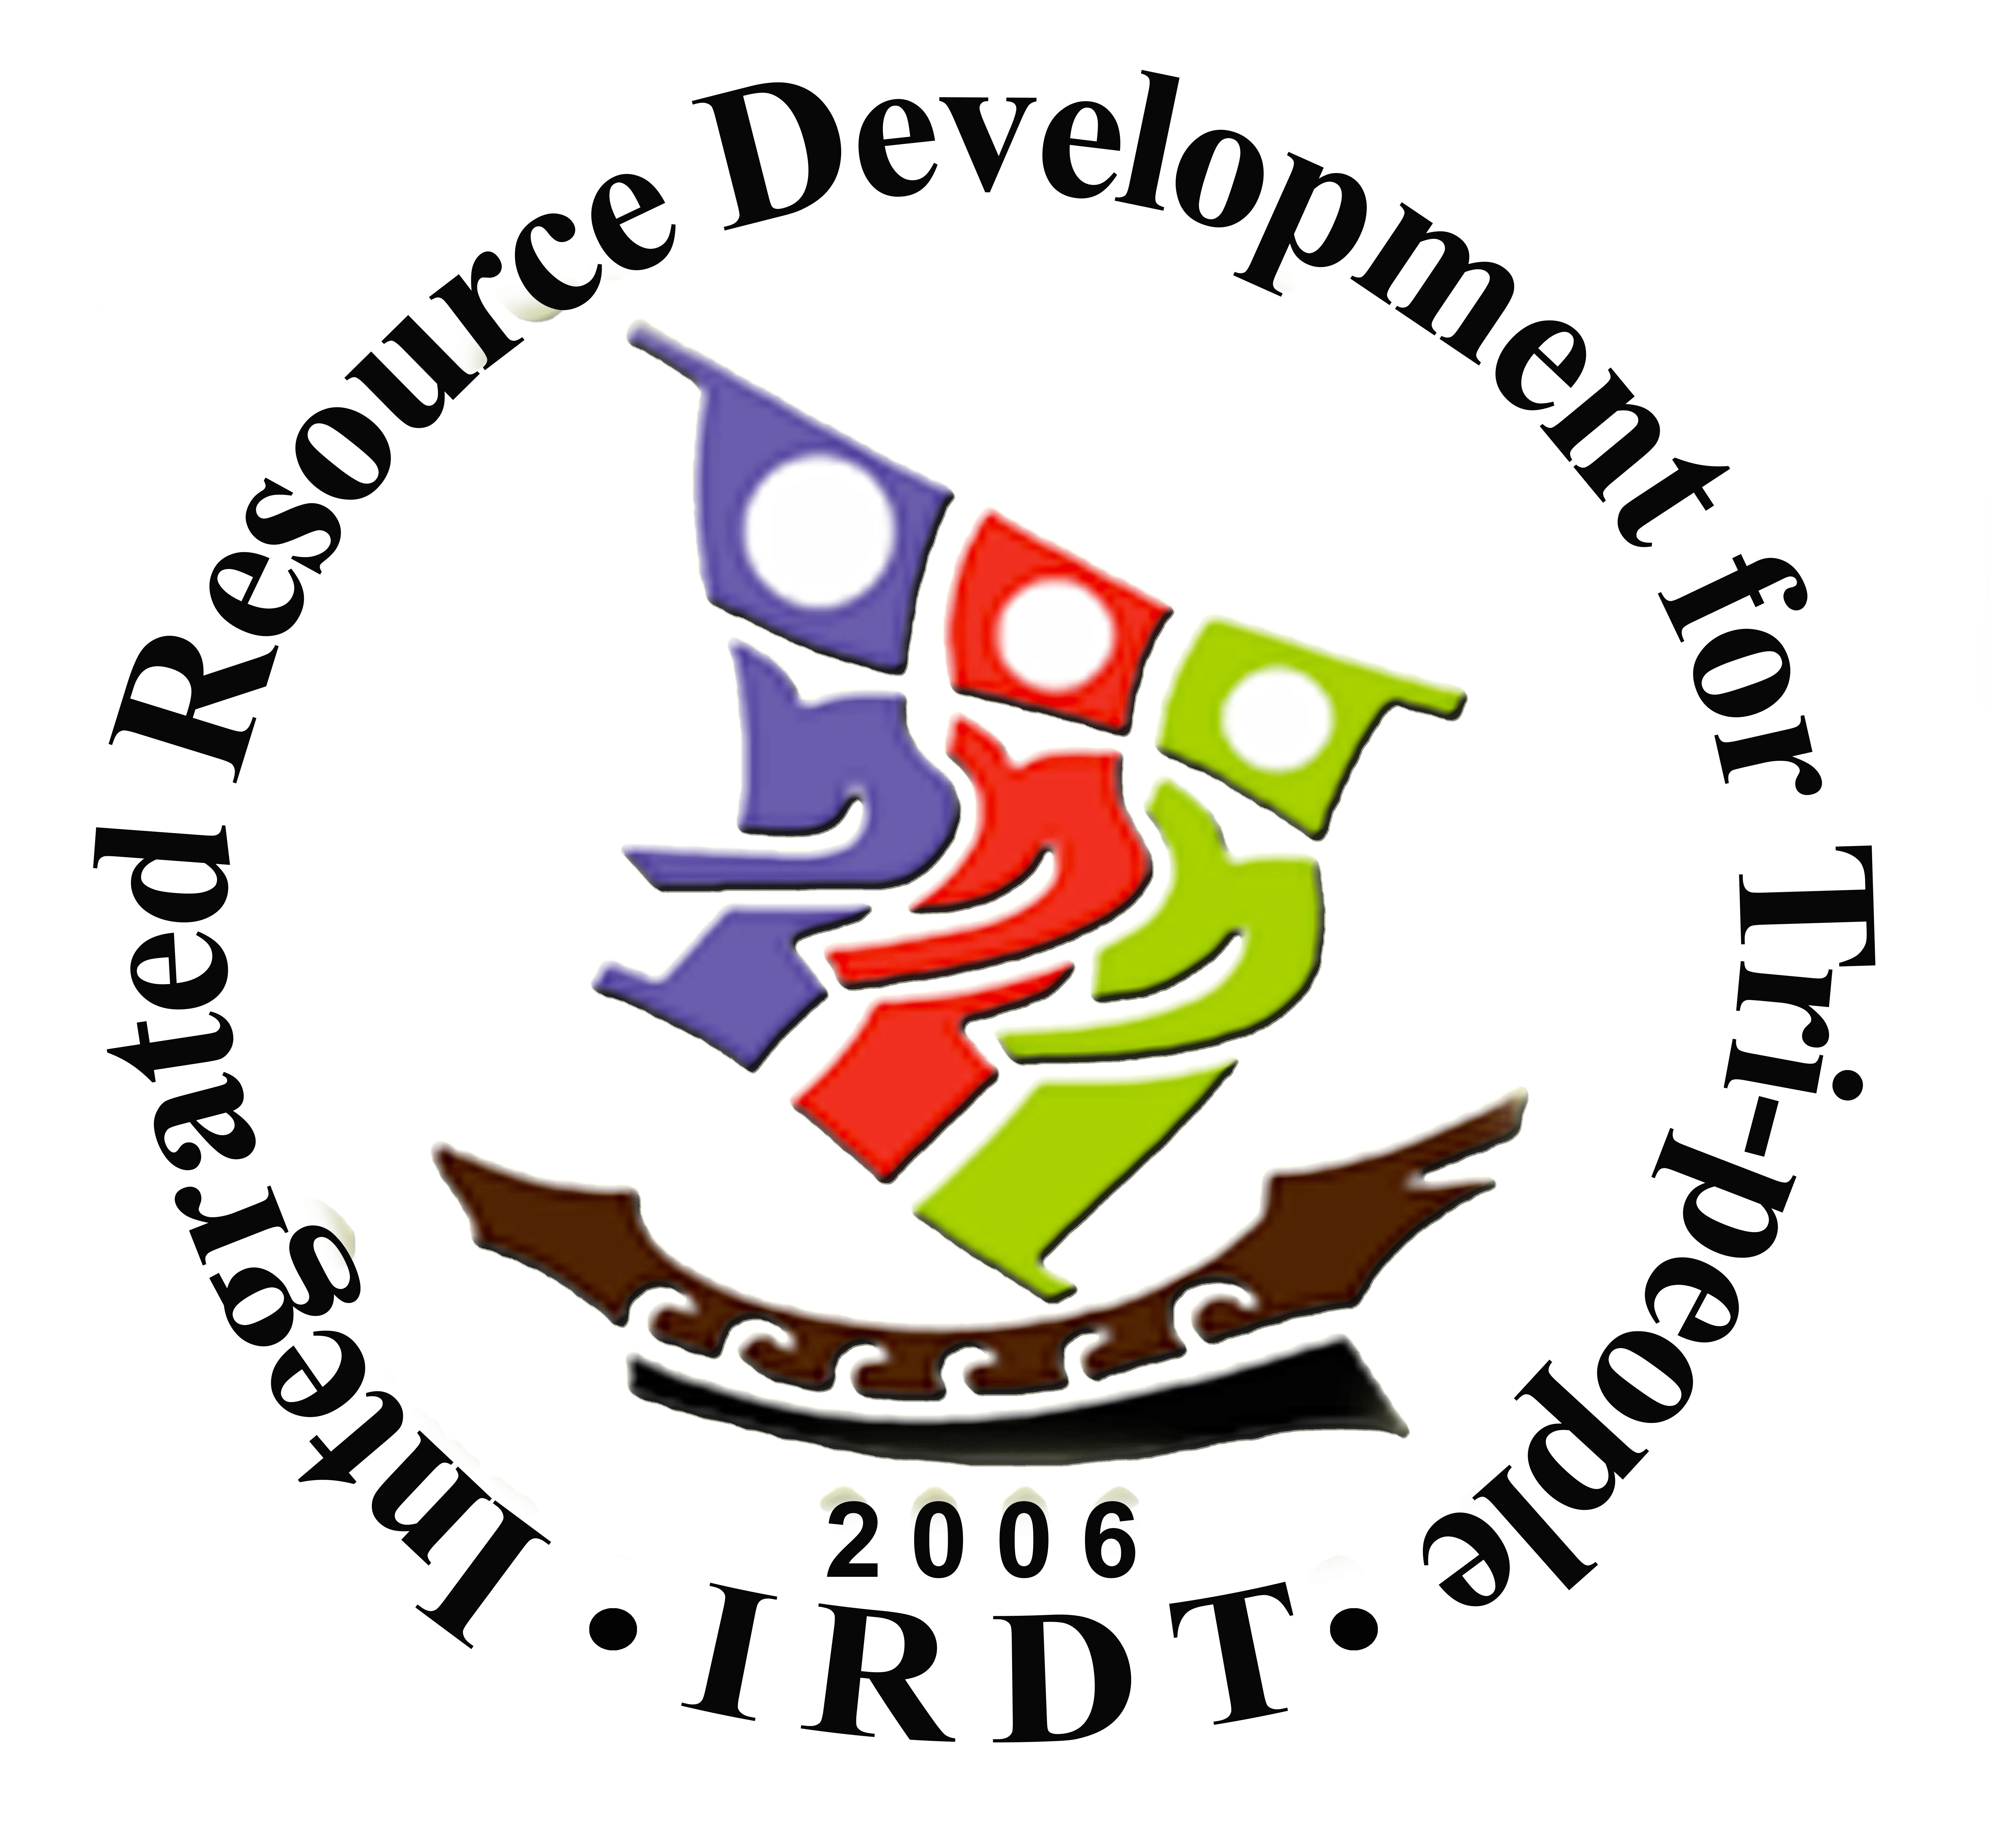 Integrated Resource Development for Tri-People